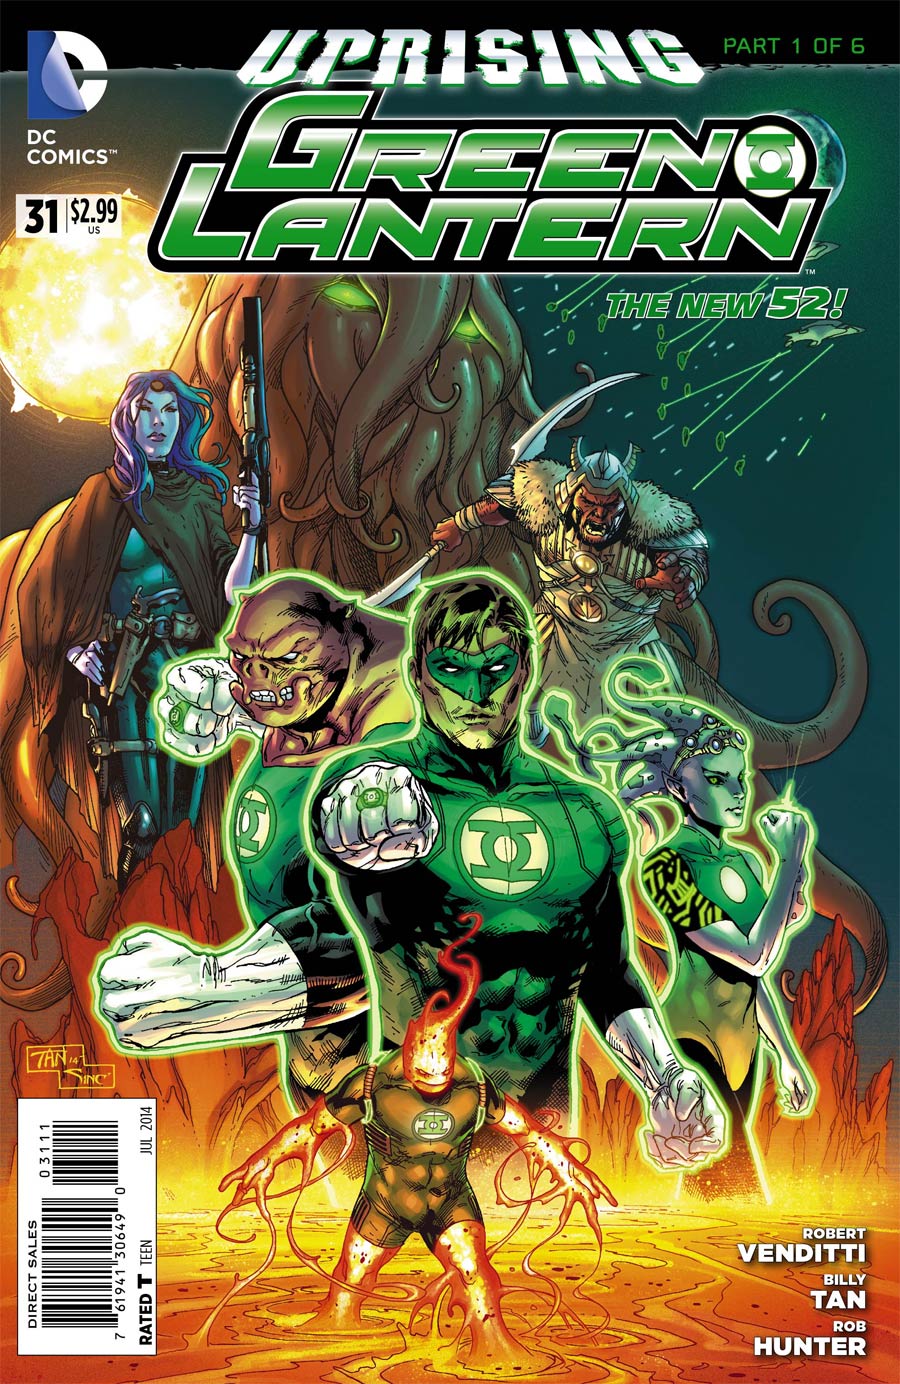 Green Lantern Vol 5 #31 Cover C Combo Pack Without Polybag (Uprising Part 1)